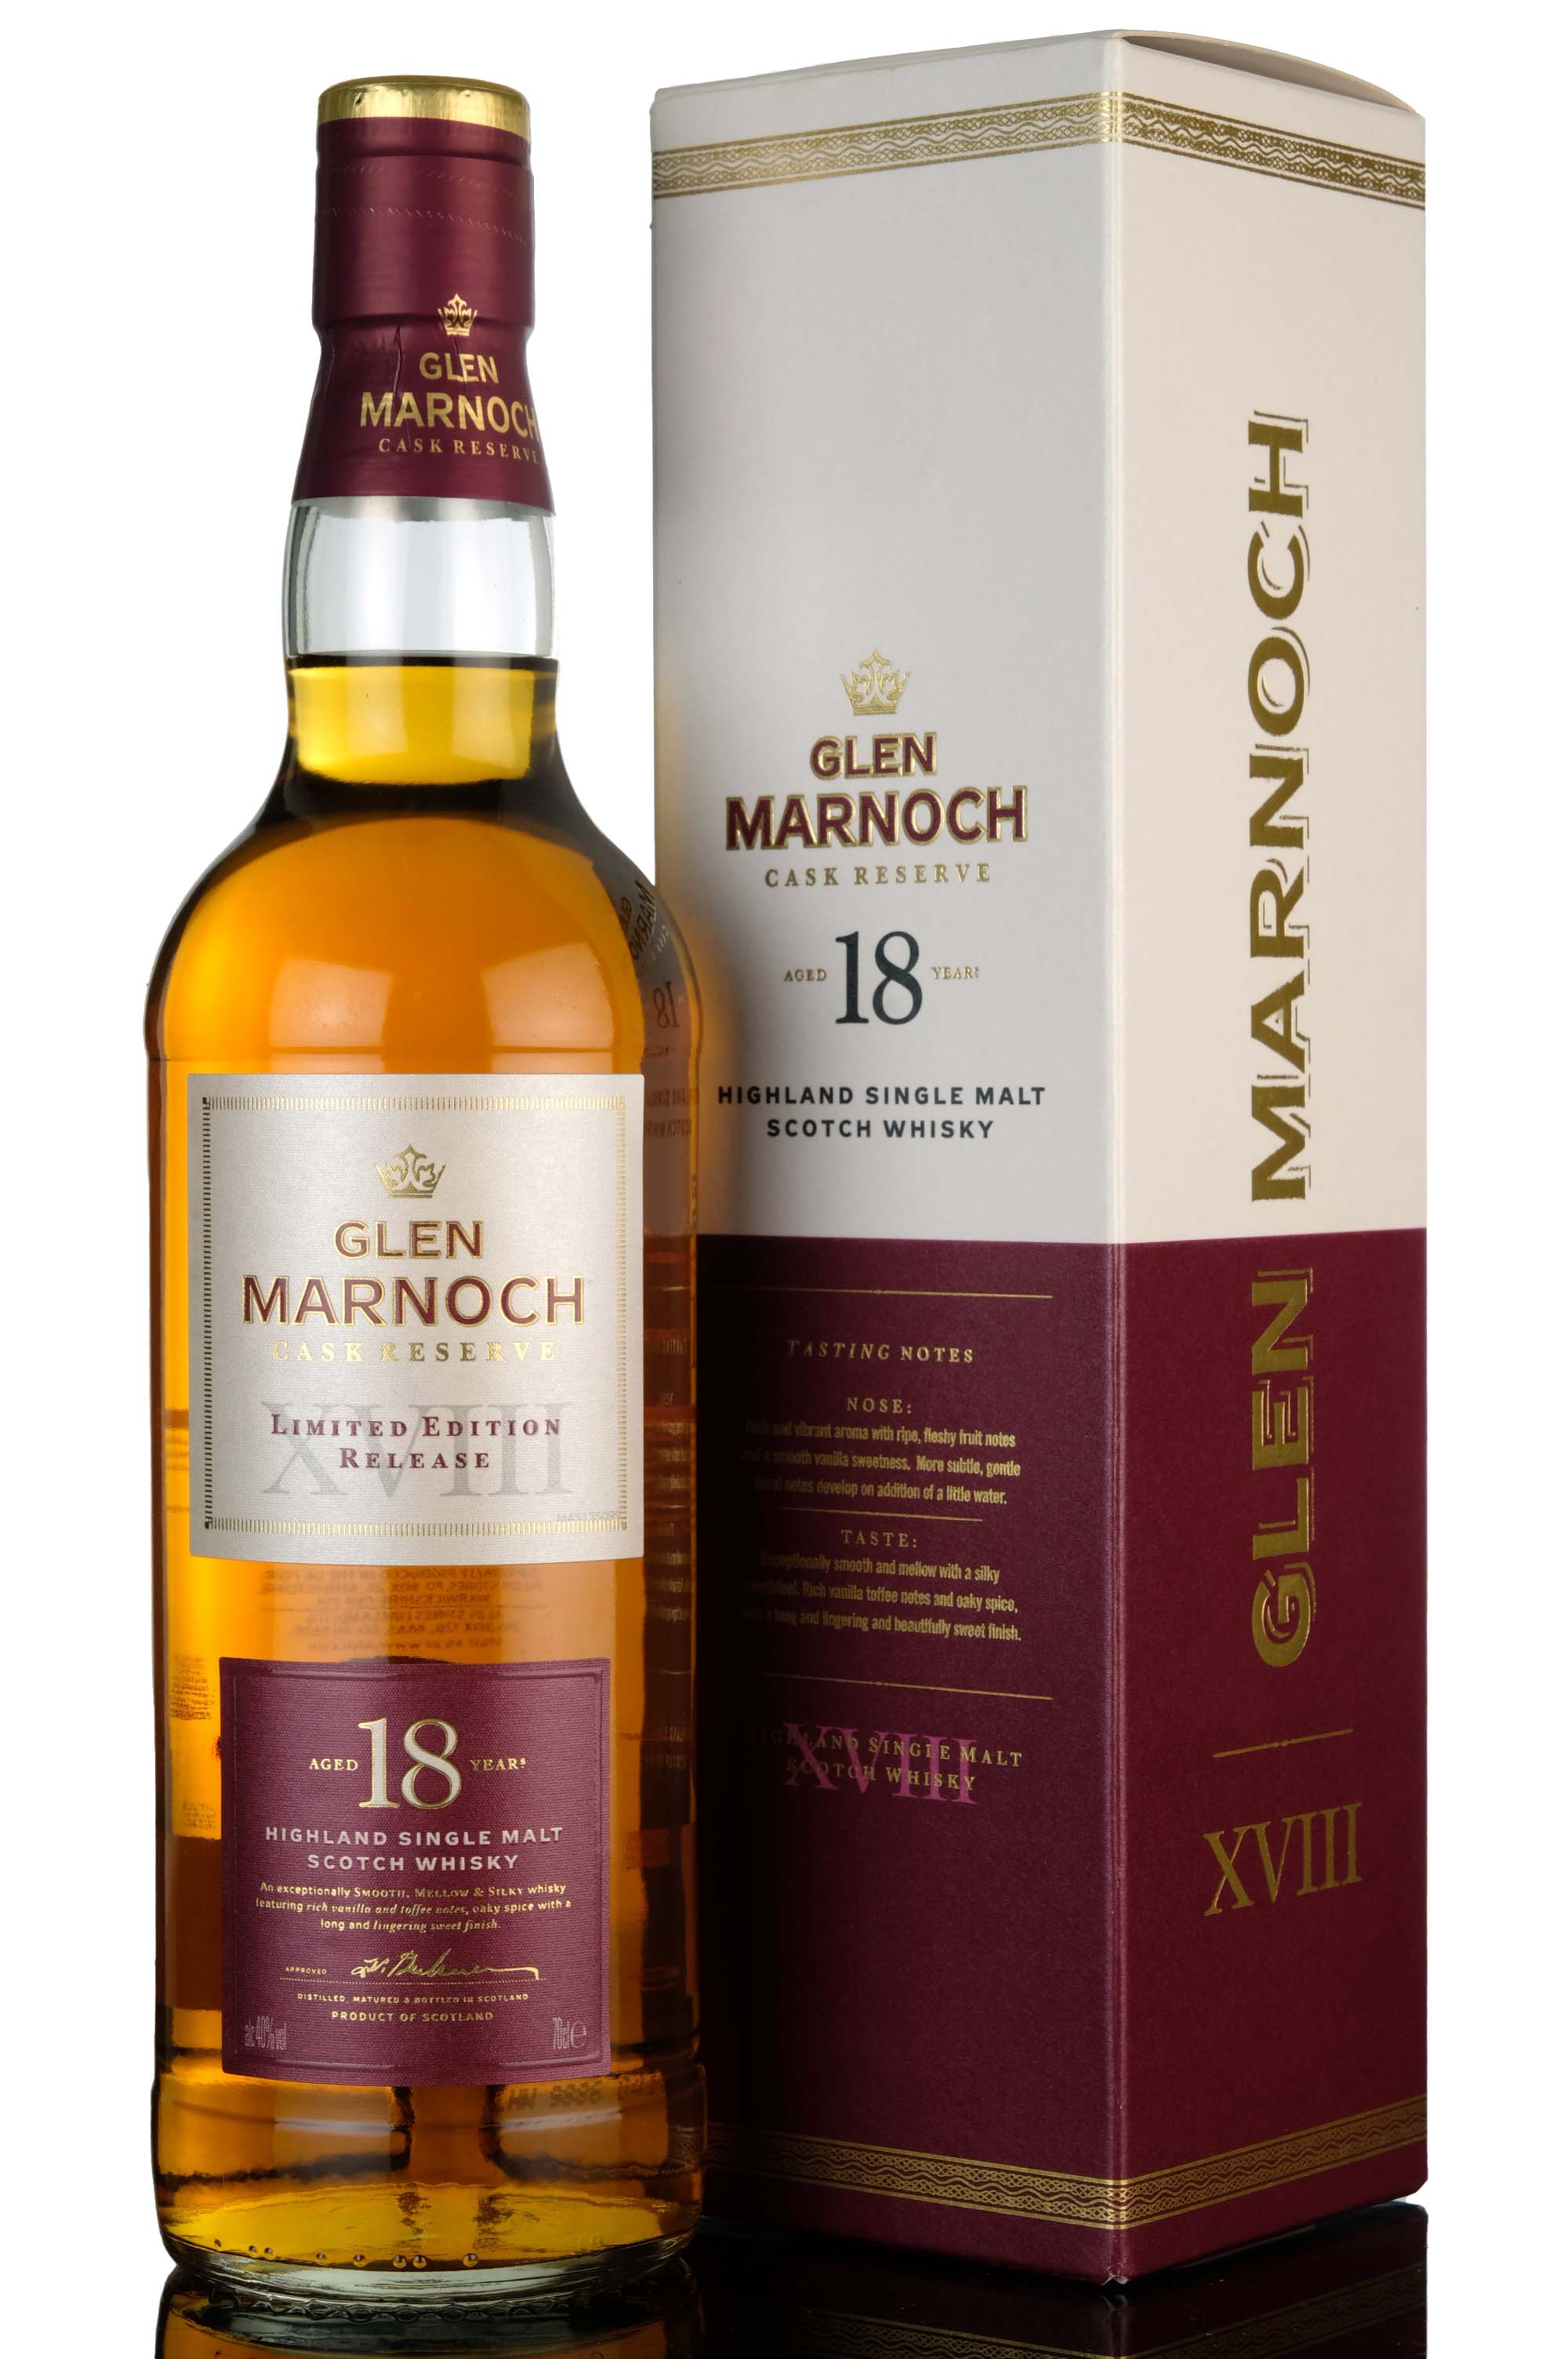 Glen Marnoch 18 Year Old - Limited Edition Release